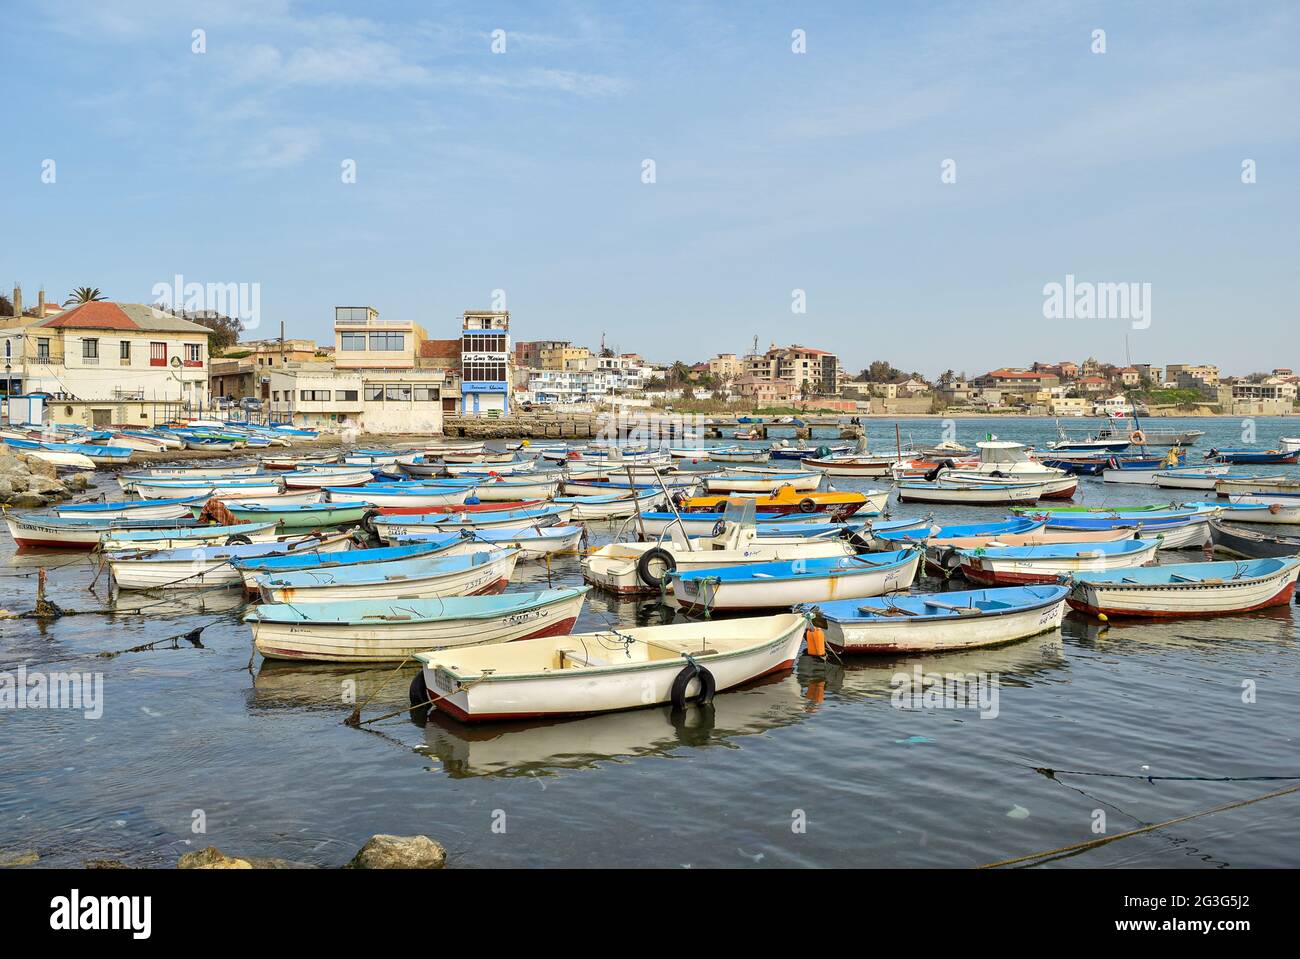 Fishing boats in an old port in Algiers, Algeria. Stock Photo